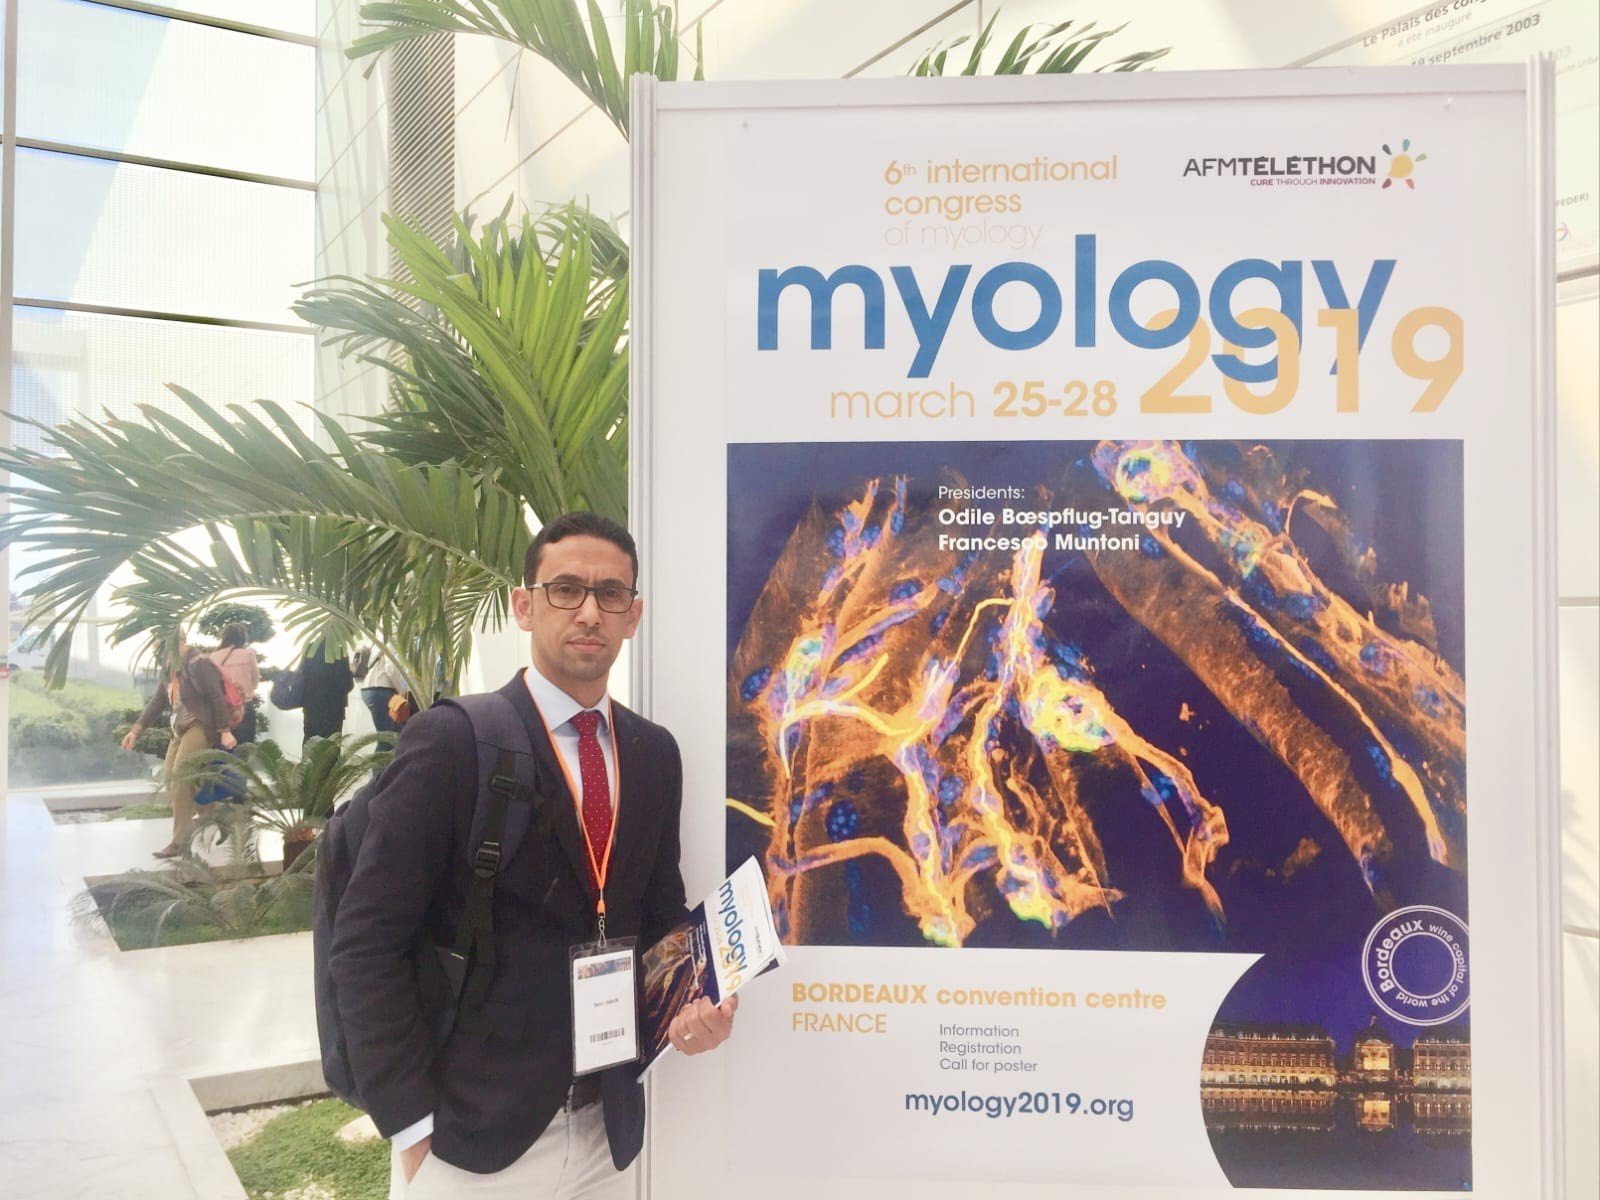 Professor Saleh Salman Omairi stands in front of a banner advertising Mylogy 2019. He is in the brightly lit atrium of a building with large palm trees in the background.